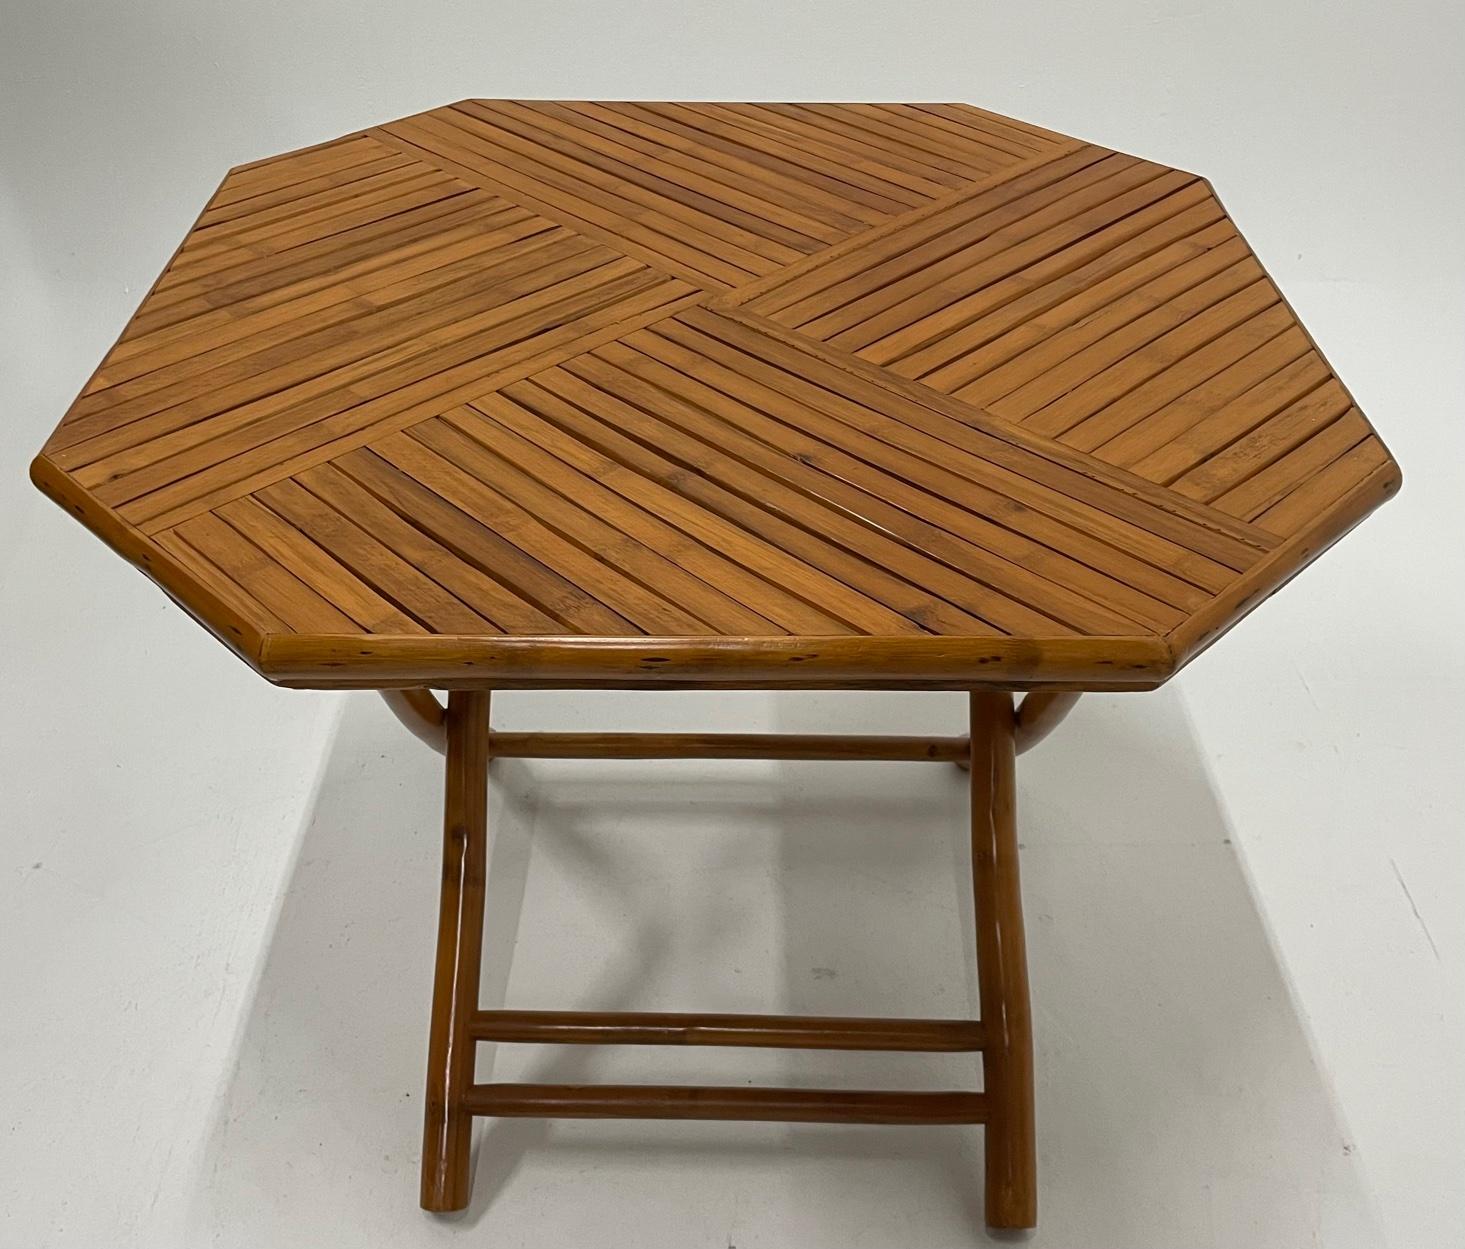 A schnazzy 8 sided bamboo table with folding legs having beautifully crafted top with triangular sections of bamboo laid out in geometric design. Makes a terrific center table or breakfast table. Great shape and form.